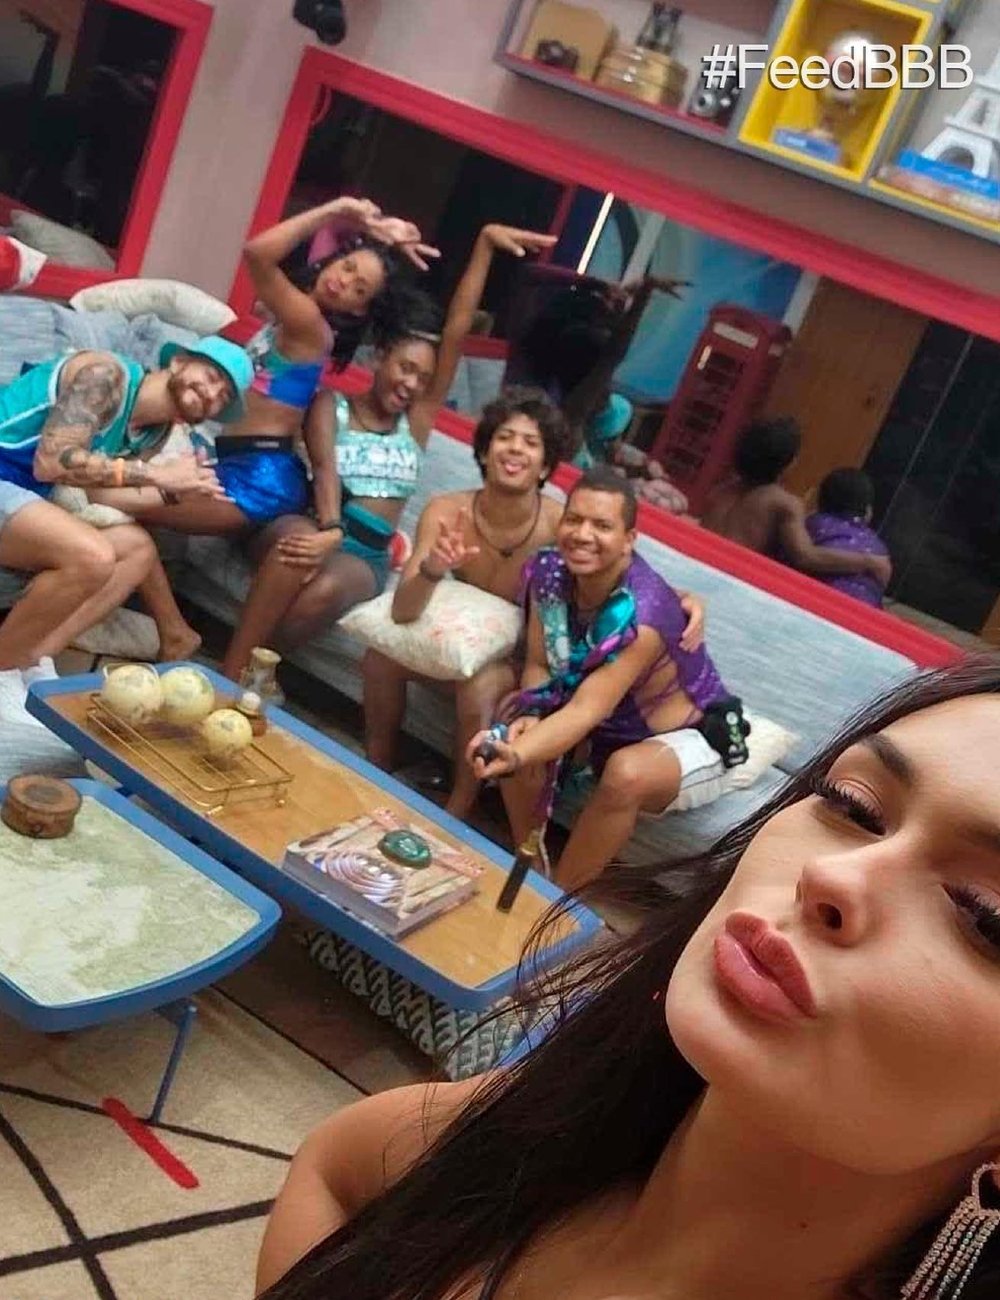 BBB - assistir - reality shows - globo - melhores reality shows - https://stealthelook.com.br